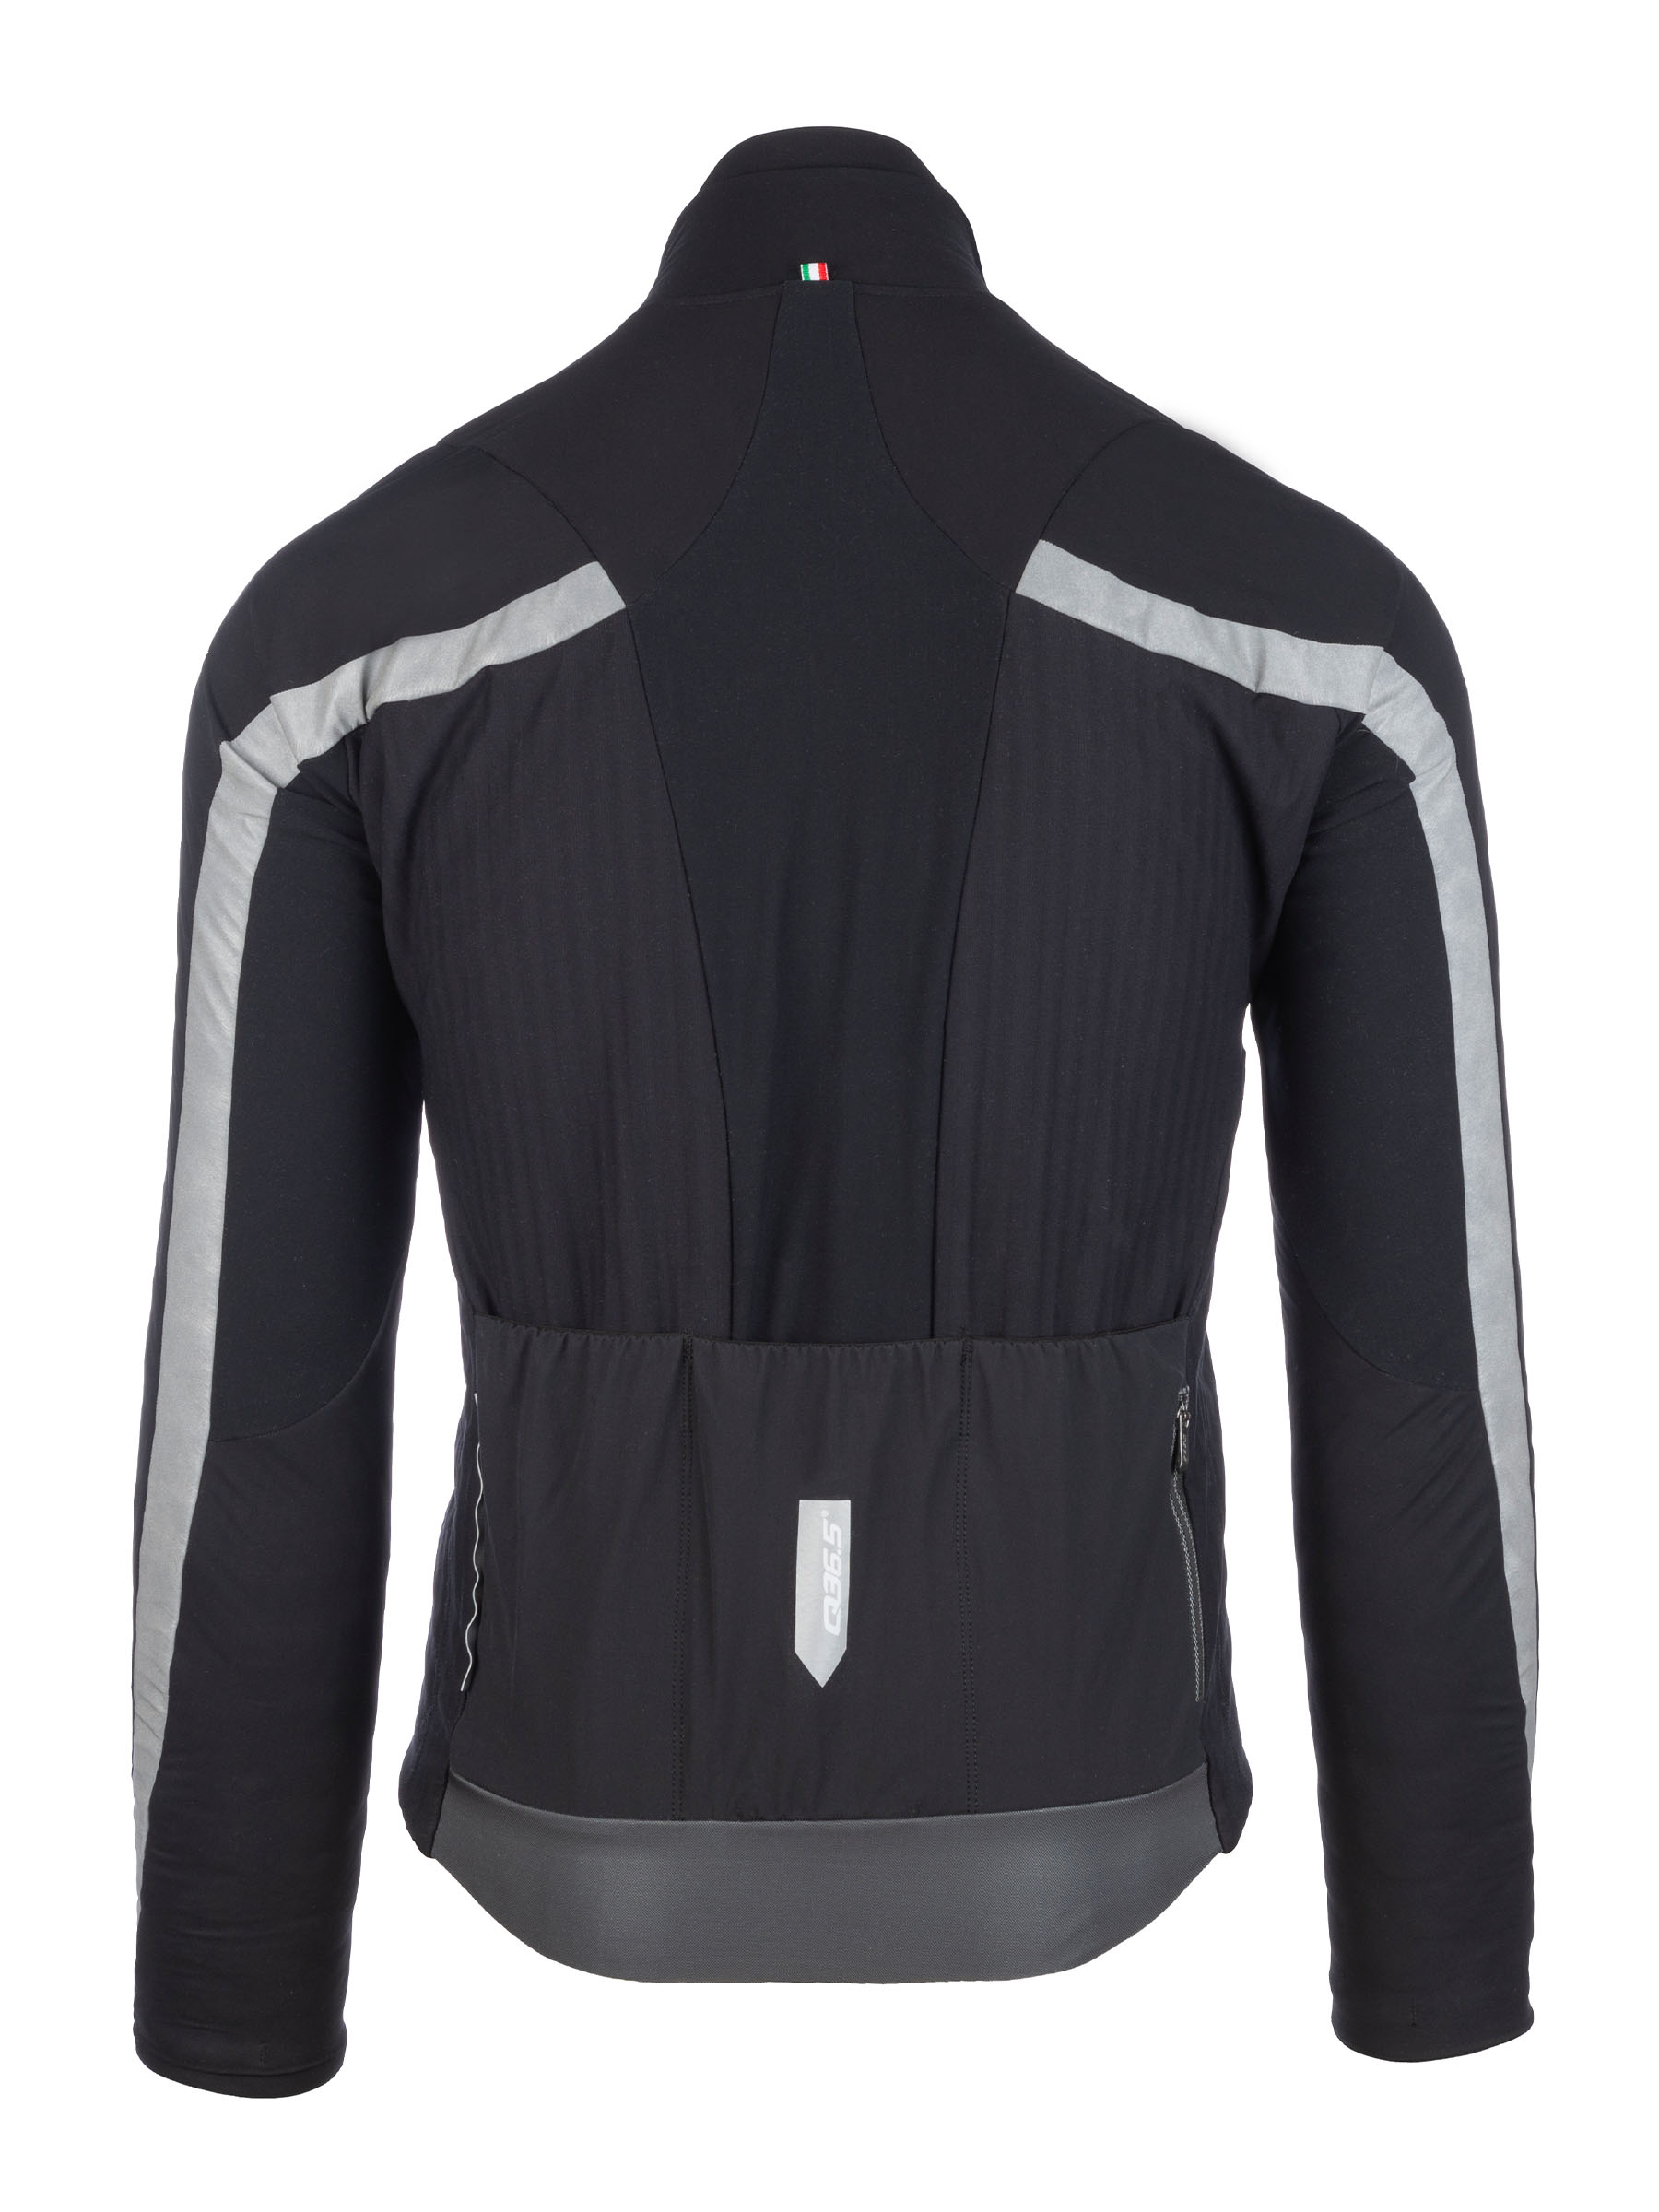 Interval Termica mens Jacket • cycling winter for jacket thermal black